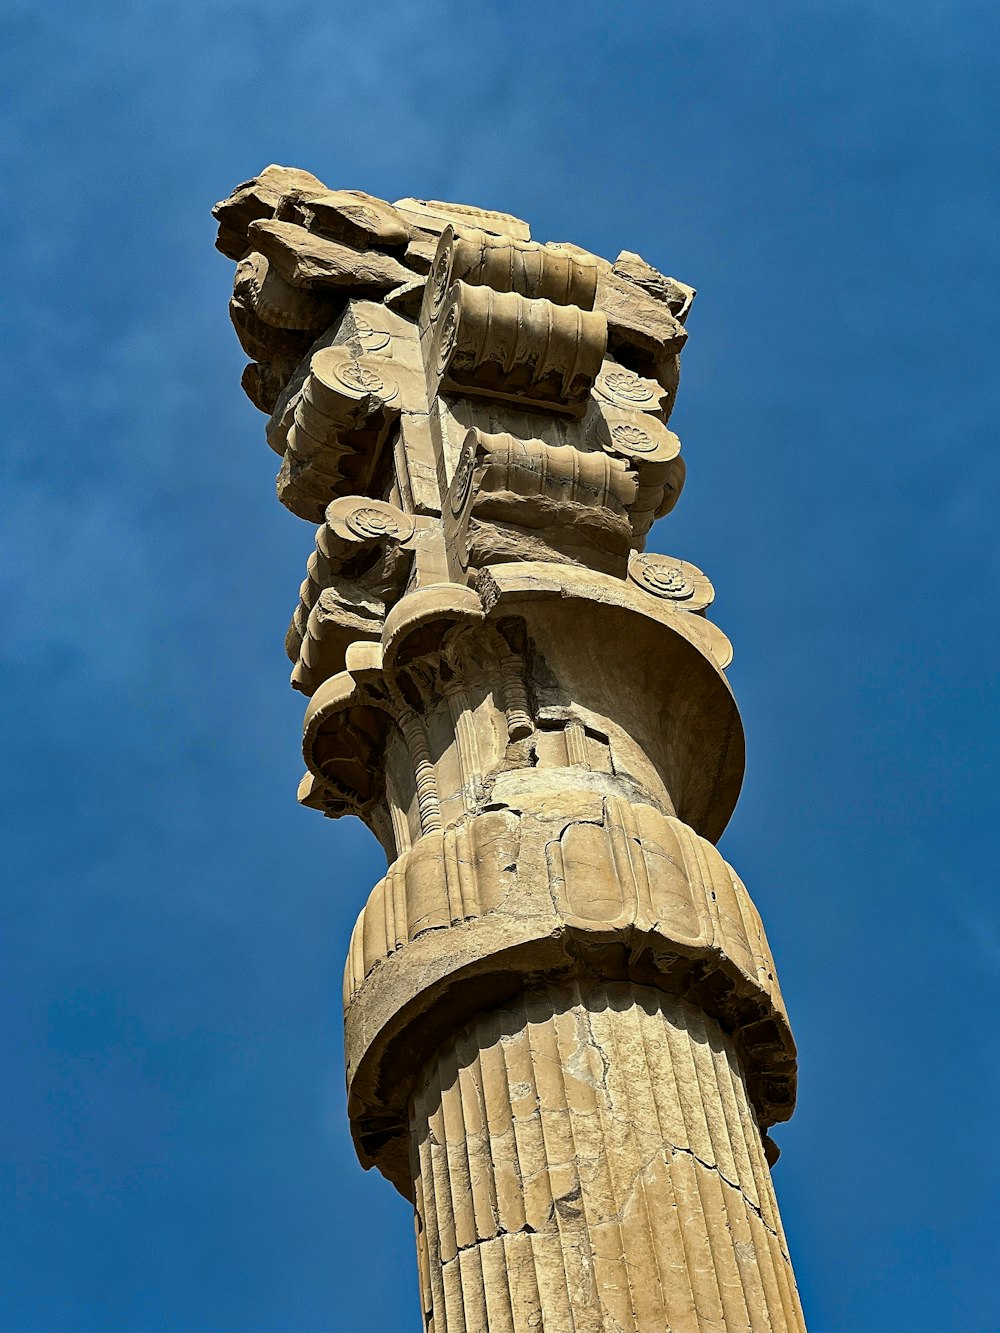 a tall stone column with a sky in the background